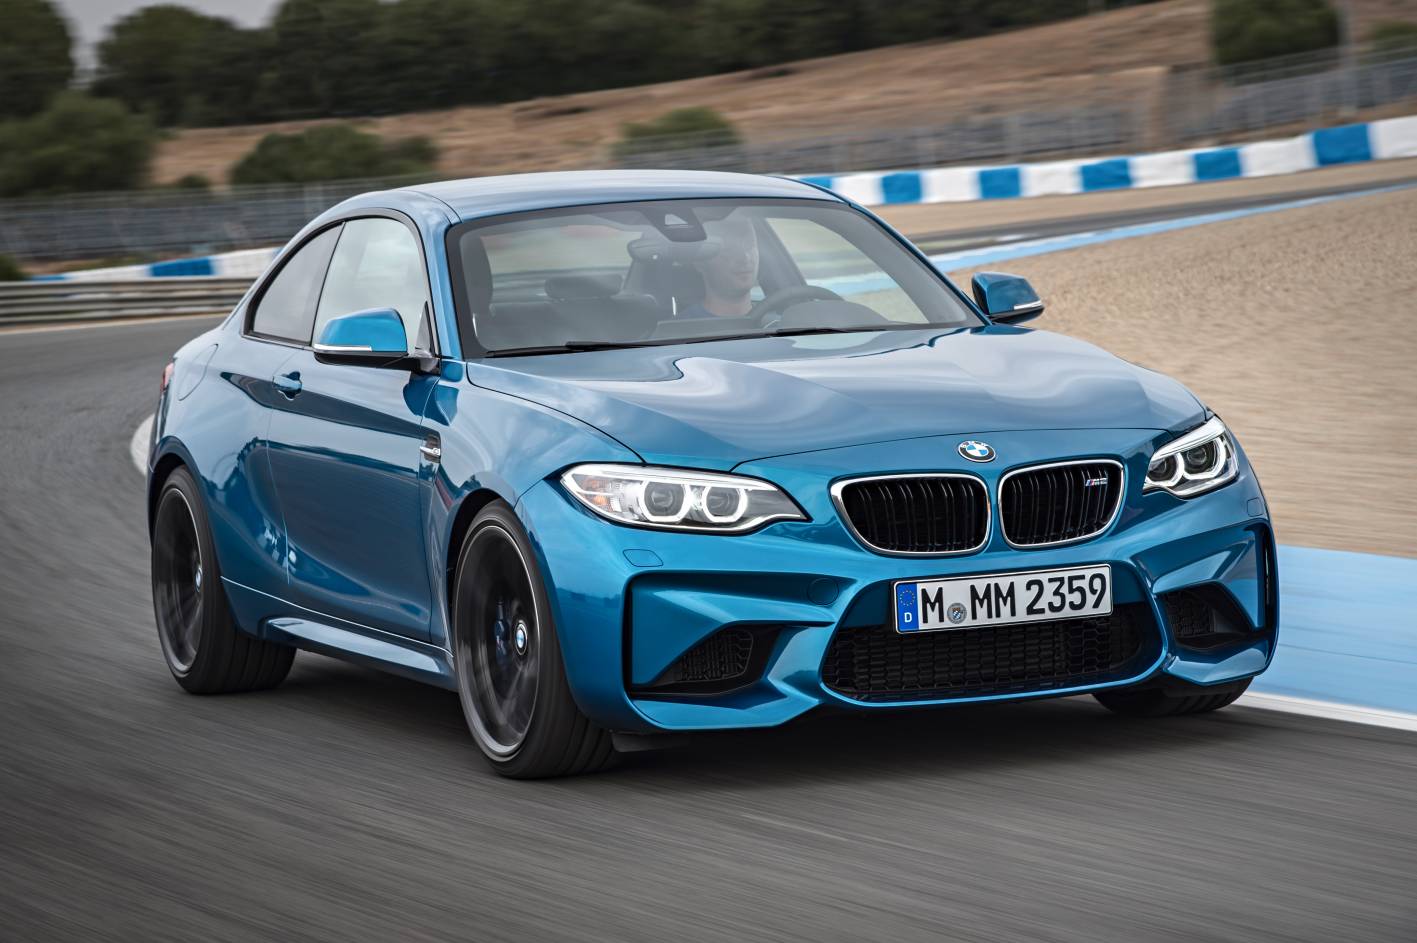 BMW M2 officially revealed; 272kW, 0-100km/h in 4.3sec